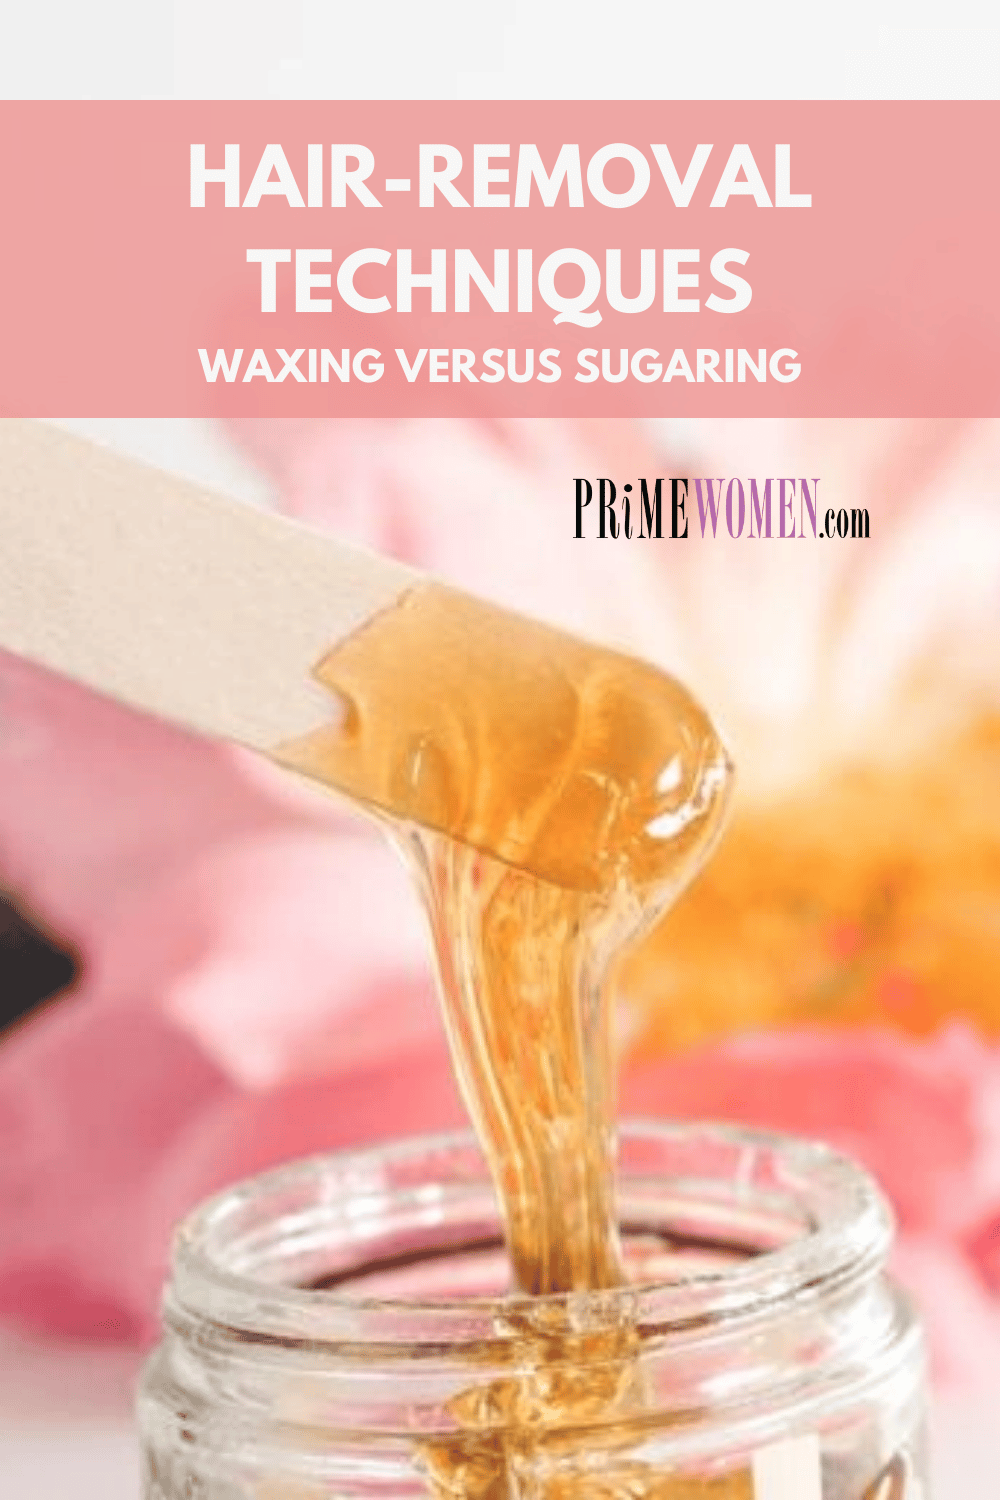 Waxing versus Sugaring for hair removal